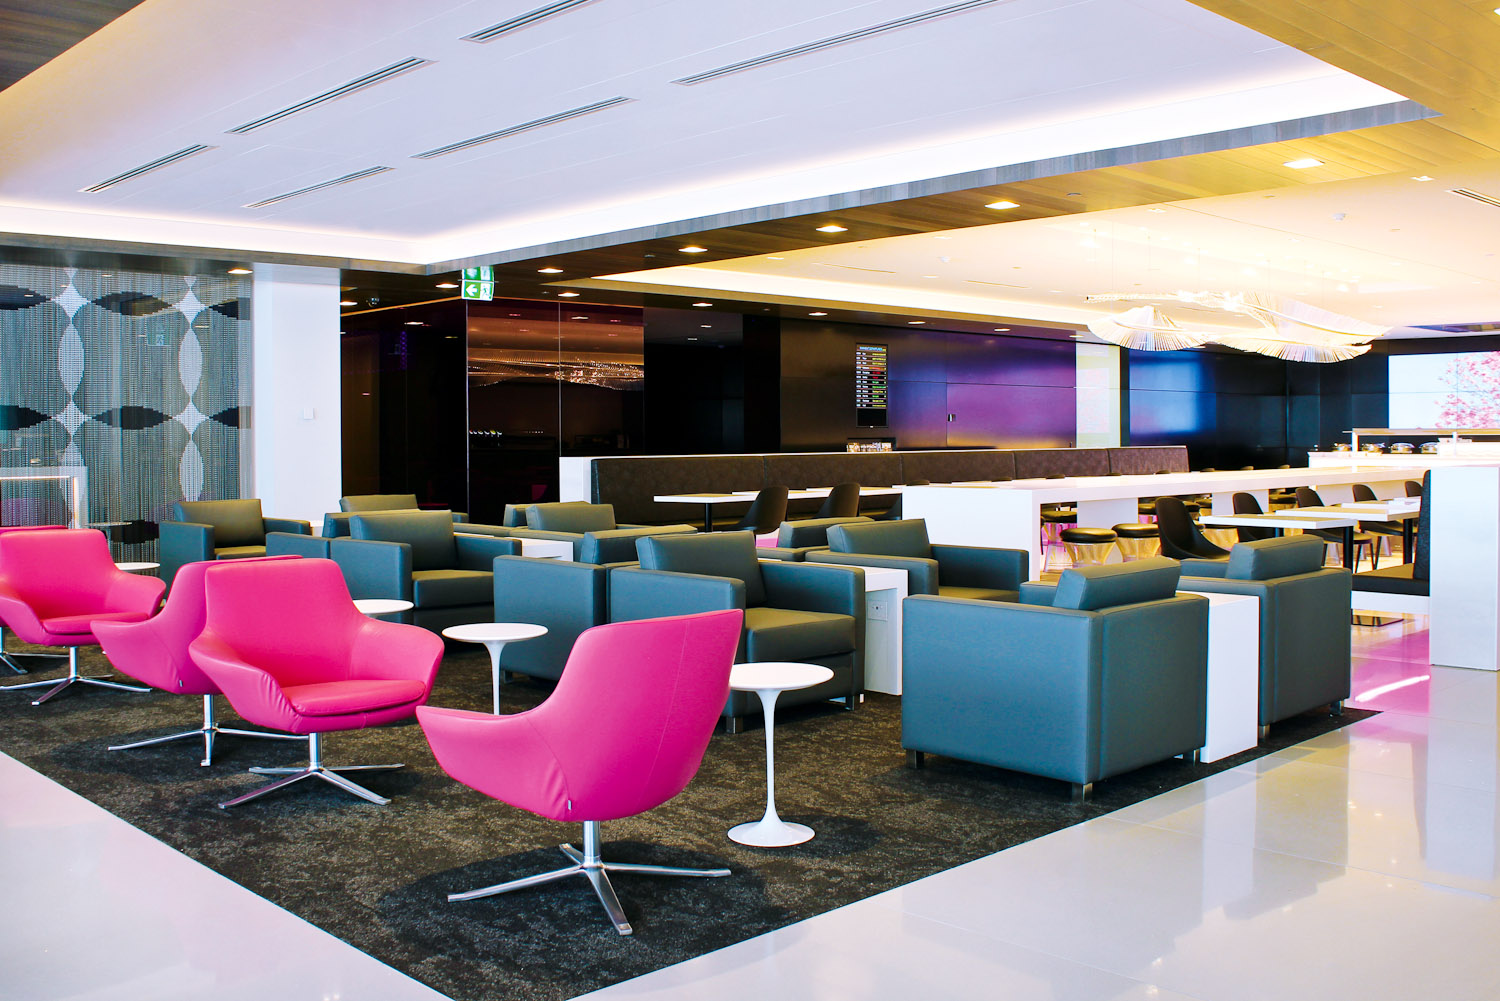 Air NZ airport lounge in Auckland.